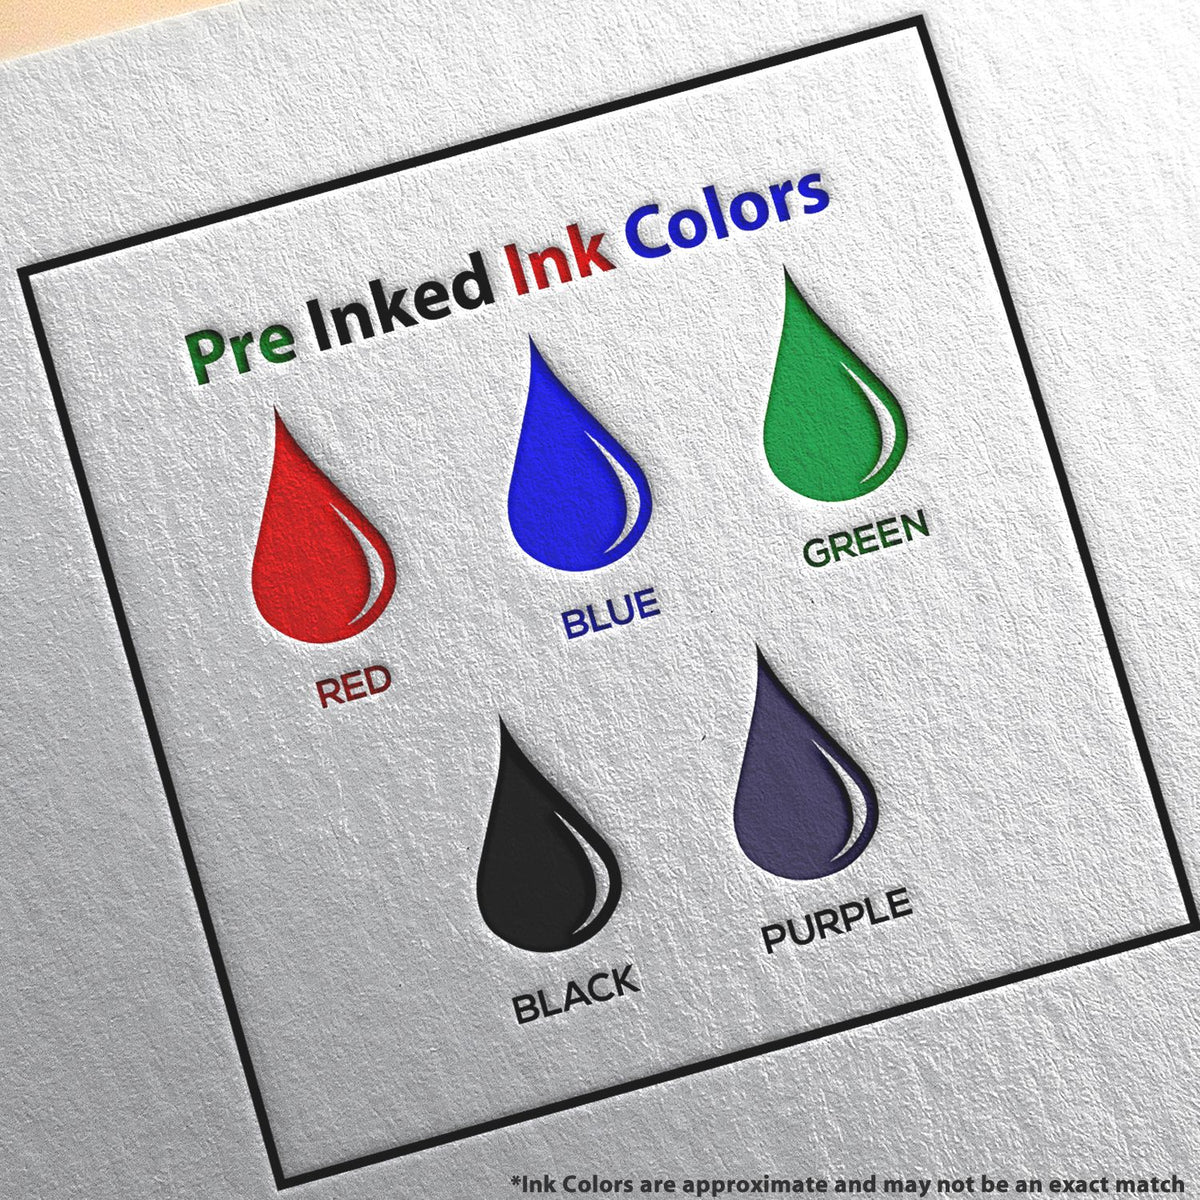 A picture showing the different ink colors or hues available for the Slim Pre-Inked North Dakota Professional Engineer Seal Stamp product.